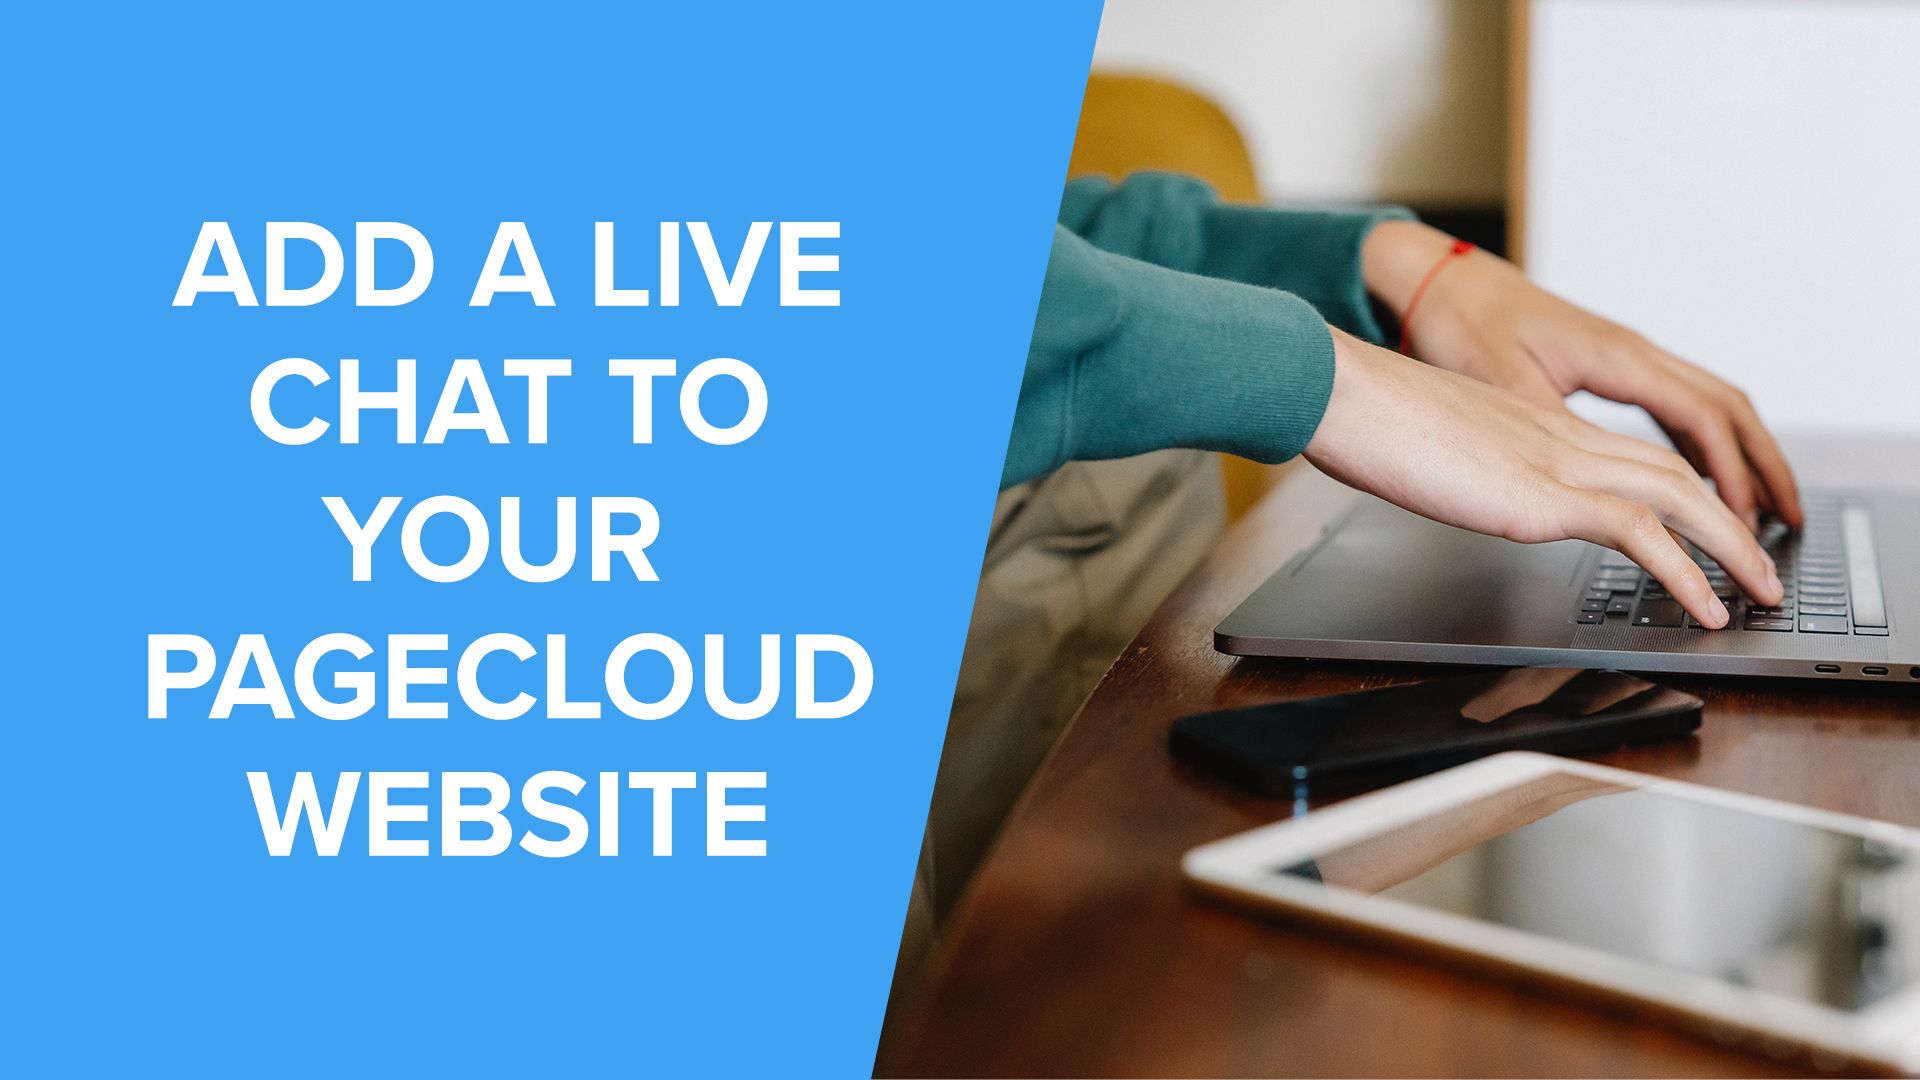 How to add a free live chat to your PageCloud website